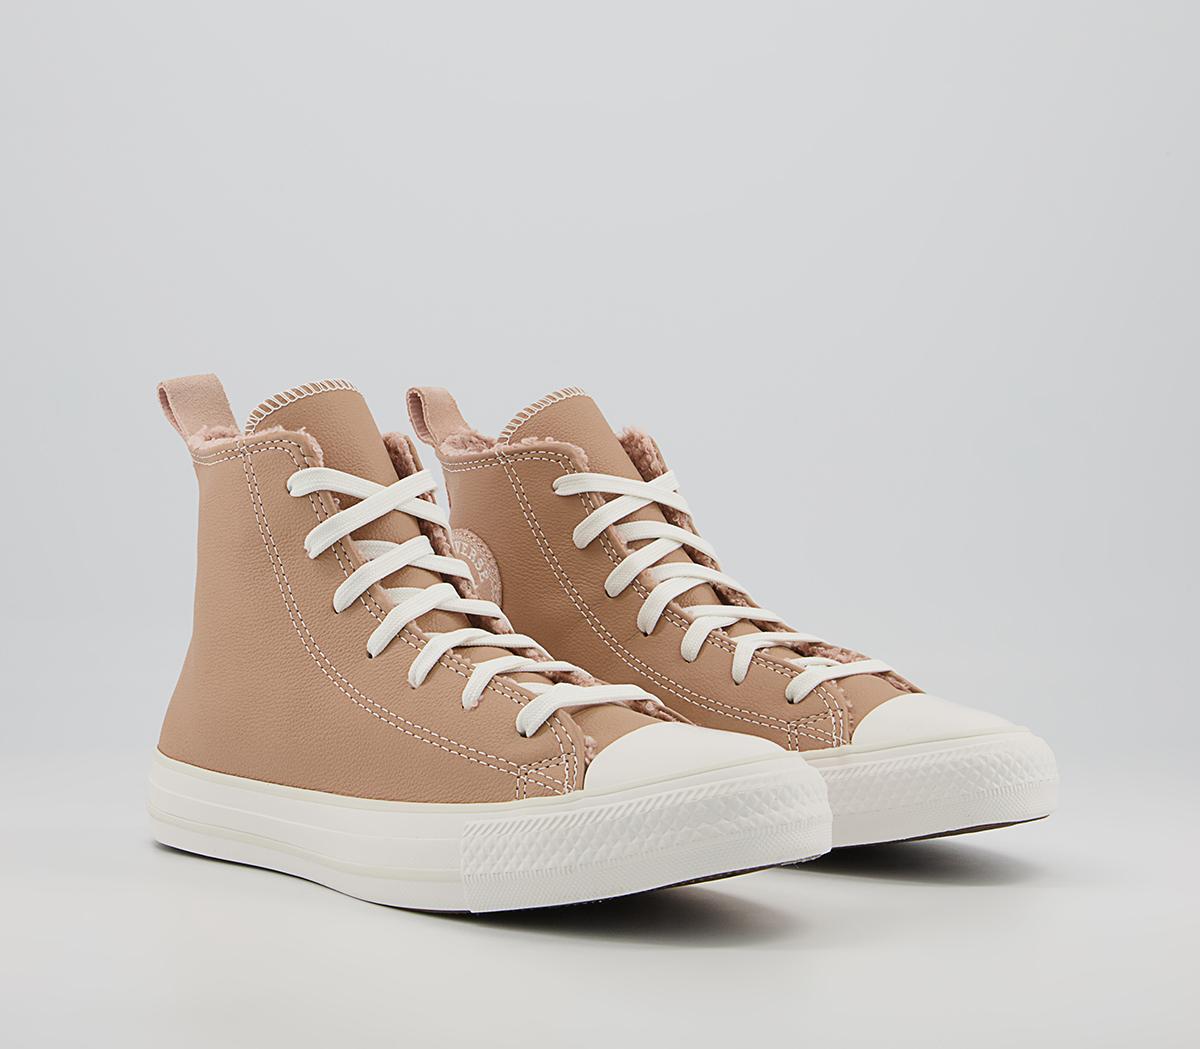 Converse Converse All Star Hi Trainers Champagne Tan Dusk Pink Vintage ...